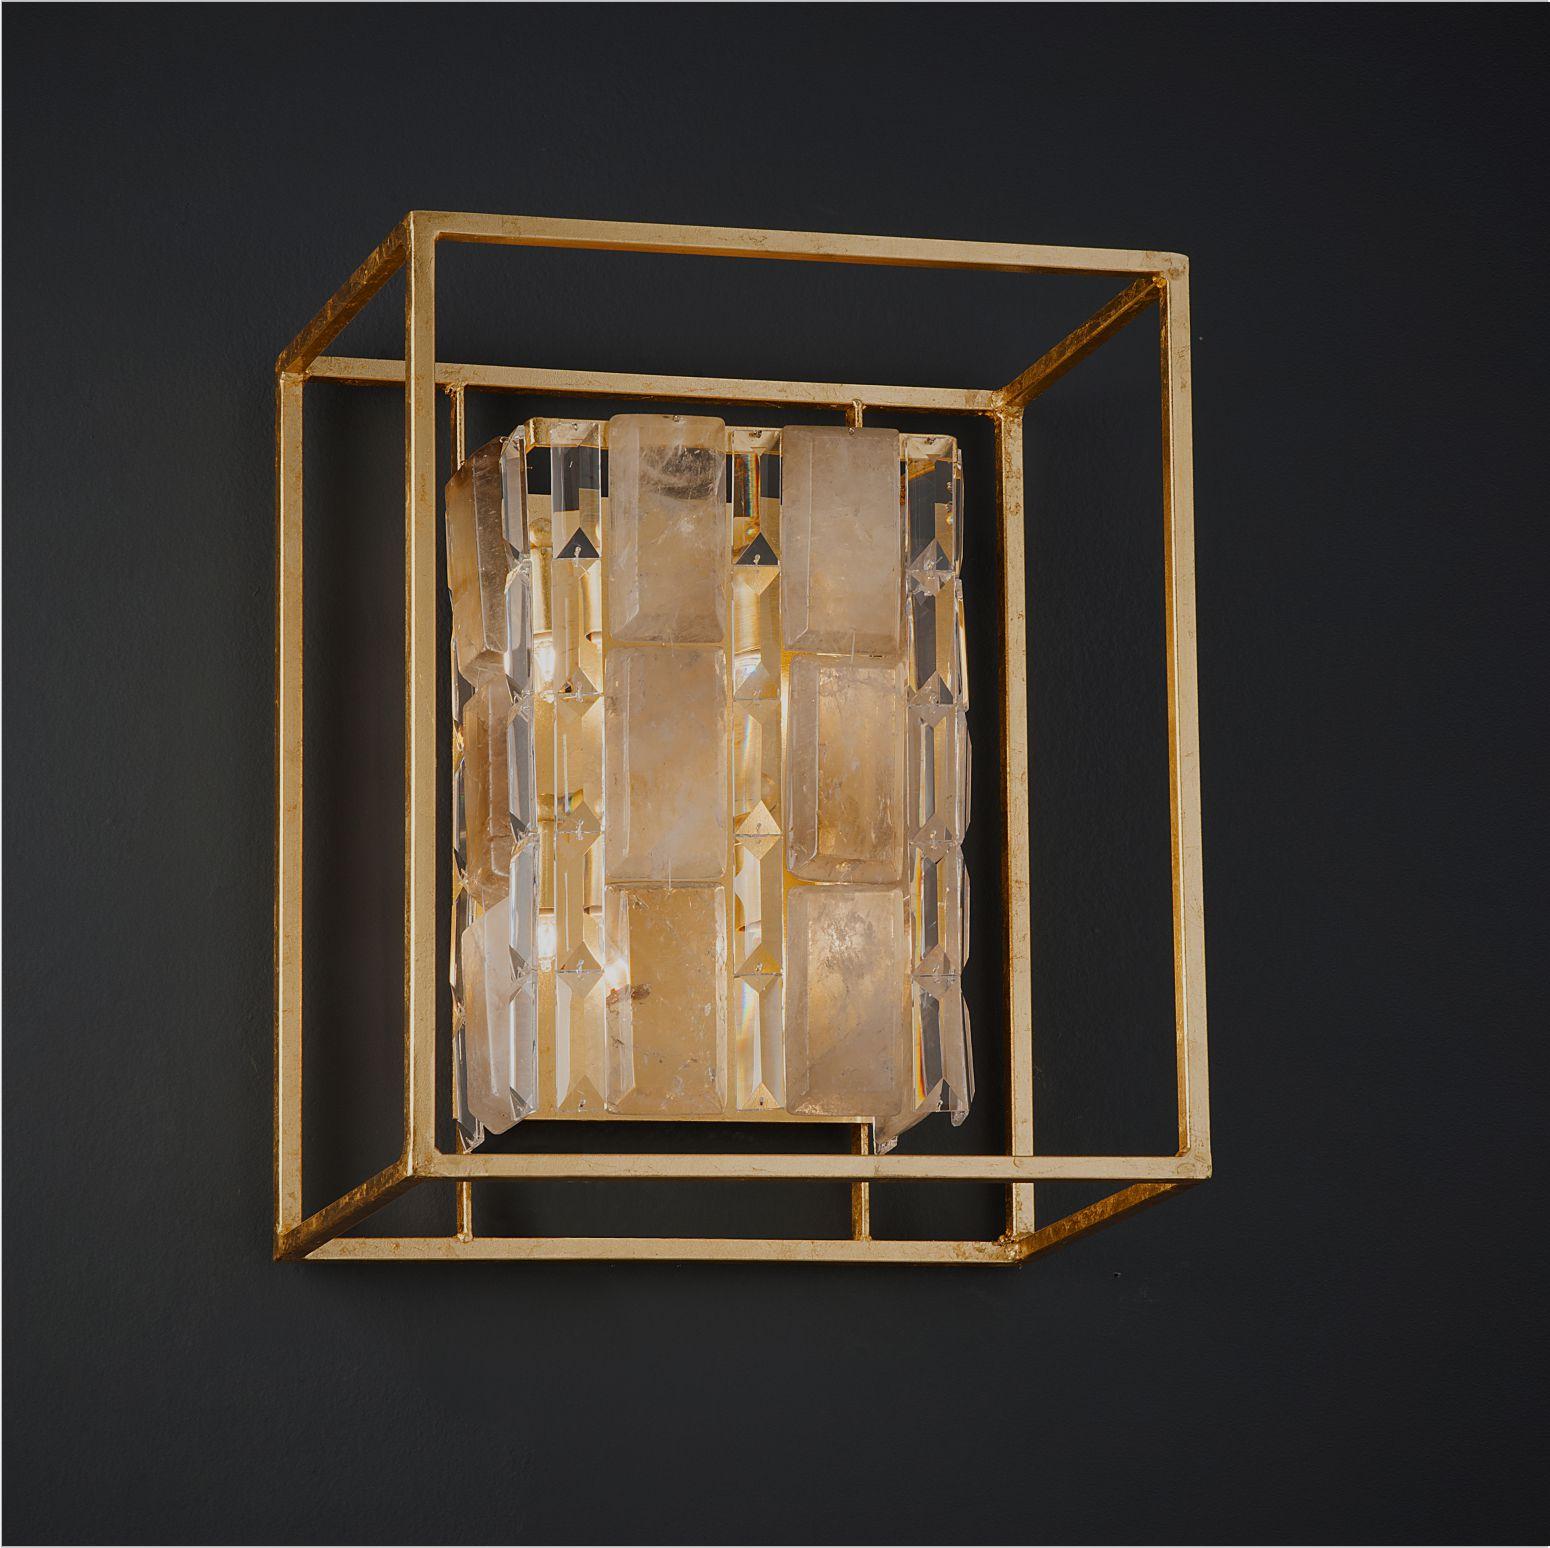 Quartz wall sconce by Aver 
Dimensions: D 20 x W 35 x H 40 cm 
Materials: Aluminum, plated with Gold Leaf. Natural Smokey Quartz. 
Lighting: 04 x G9
Finish: Silver Veneer, Aged Silver Veneer, Gold Veneer, Aged Gold Veneer, Copper Veneer, Aged Copper